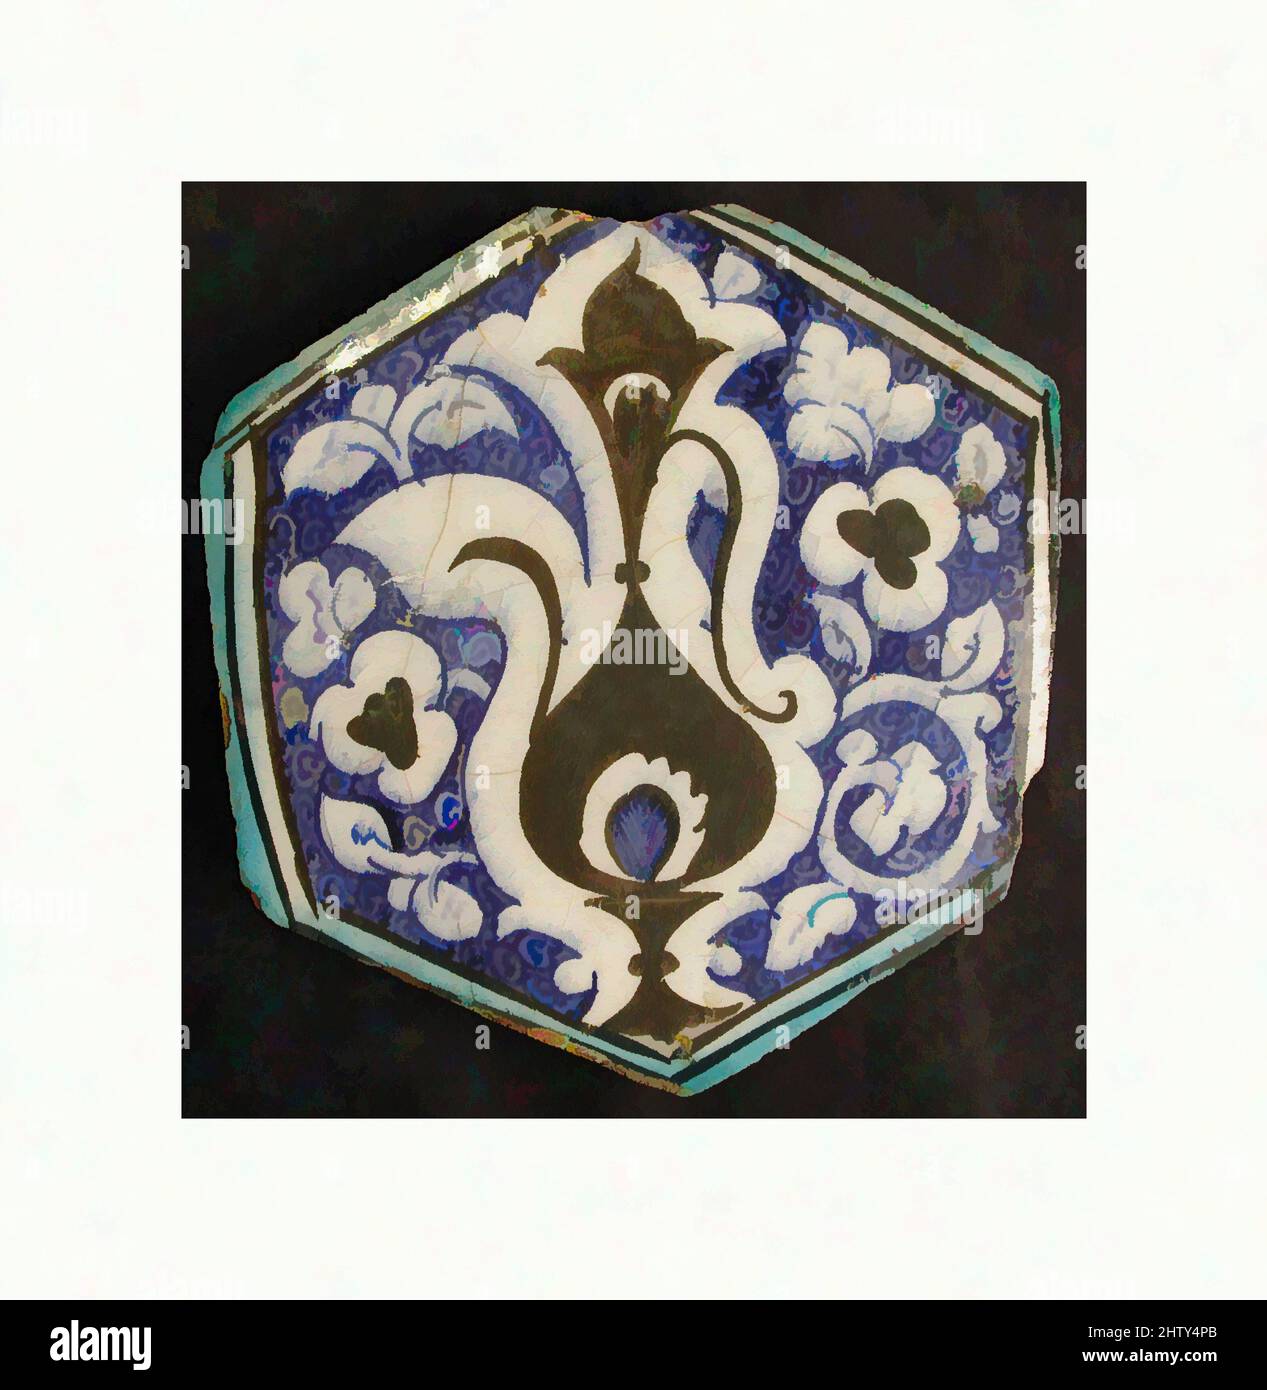 Art inspired by Hexagonal Tile, first half 15th century, Attributed to Syria, Composite body; underglaze painted, Ht. 7 1/8 in. (18.1 cm), Ceramics-Tiles, The background of tightly coiled spirals and the use of black, blue, and turquoise underglaze pigments betray the Syrian provenance, Classic works modernized by Artotop with a splash of modernity. Shapes, color and value, eye-catching visual impact on art. Emotions through freedom of artworks in a contemporary way. A timeless message pursuing a wildly creative new direction. Artists turning to the digital medium and creating the Artotop NFT Stock Photo